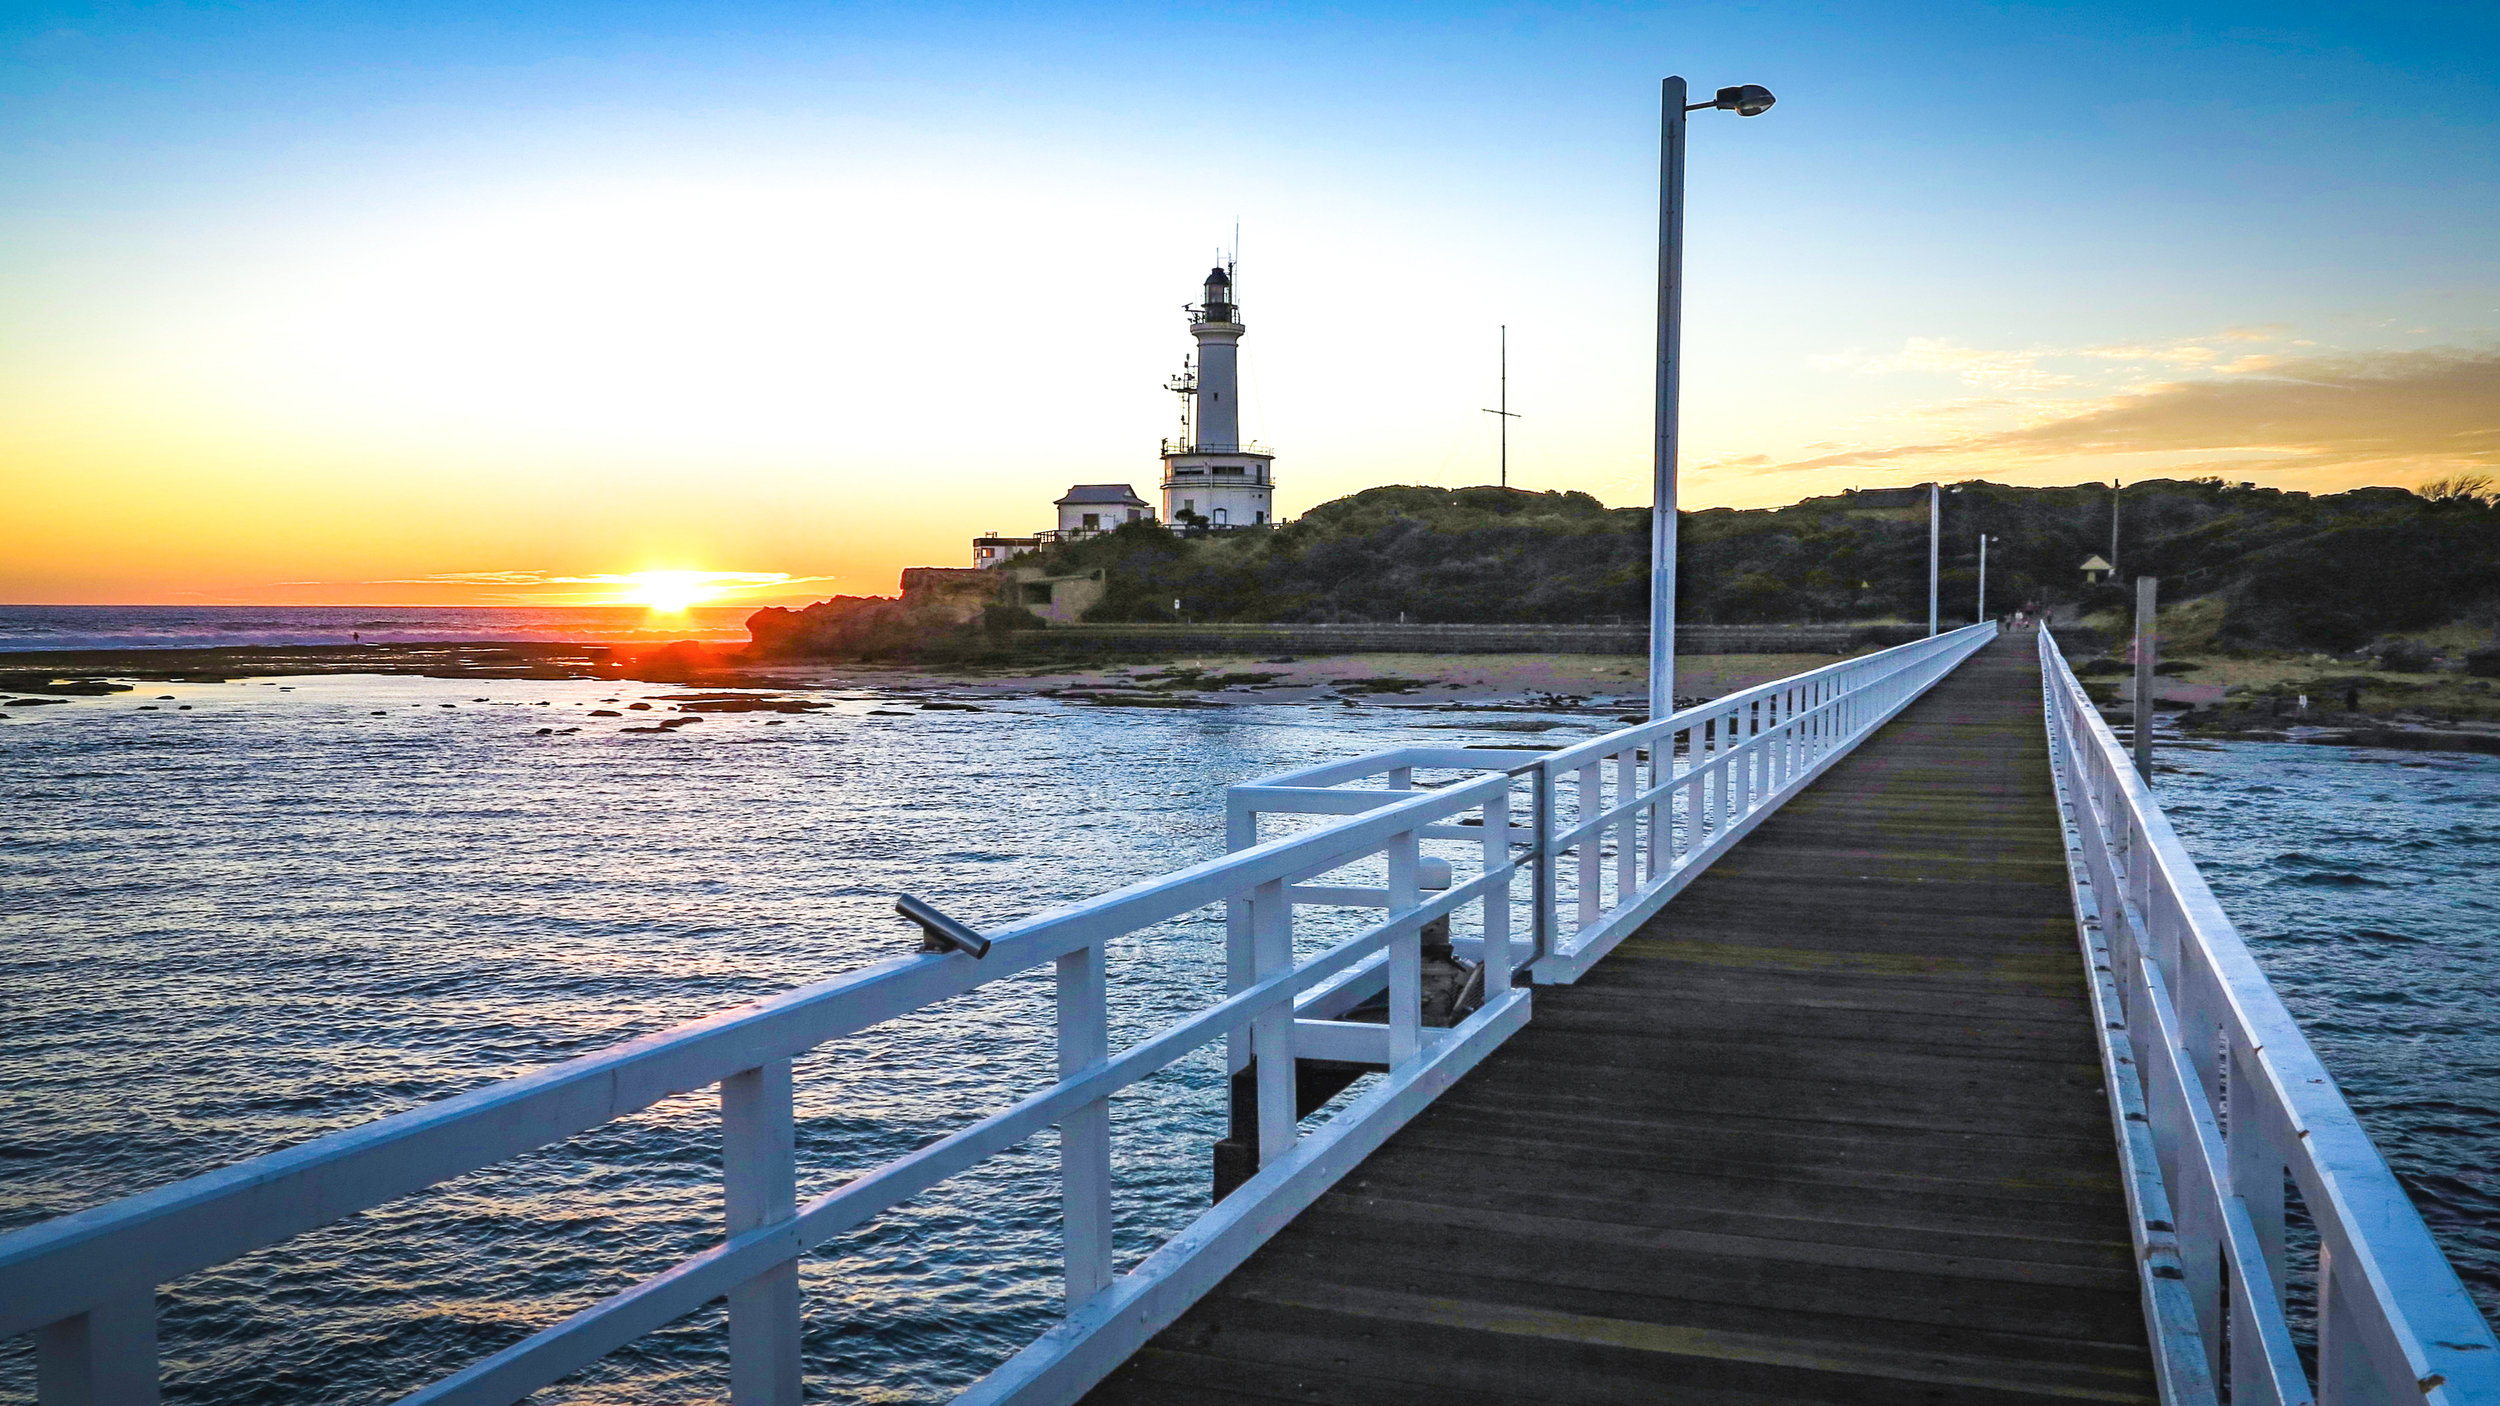 POINT LONSDALE